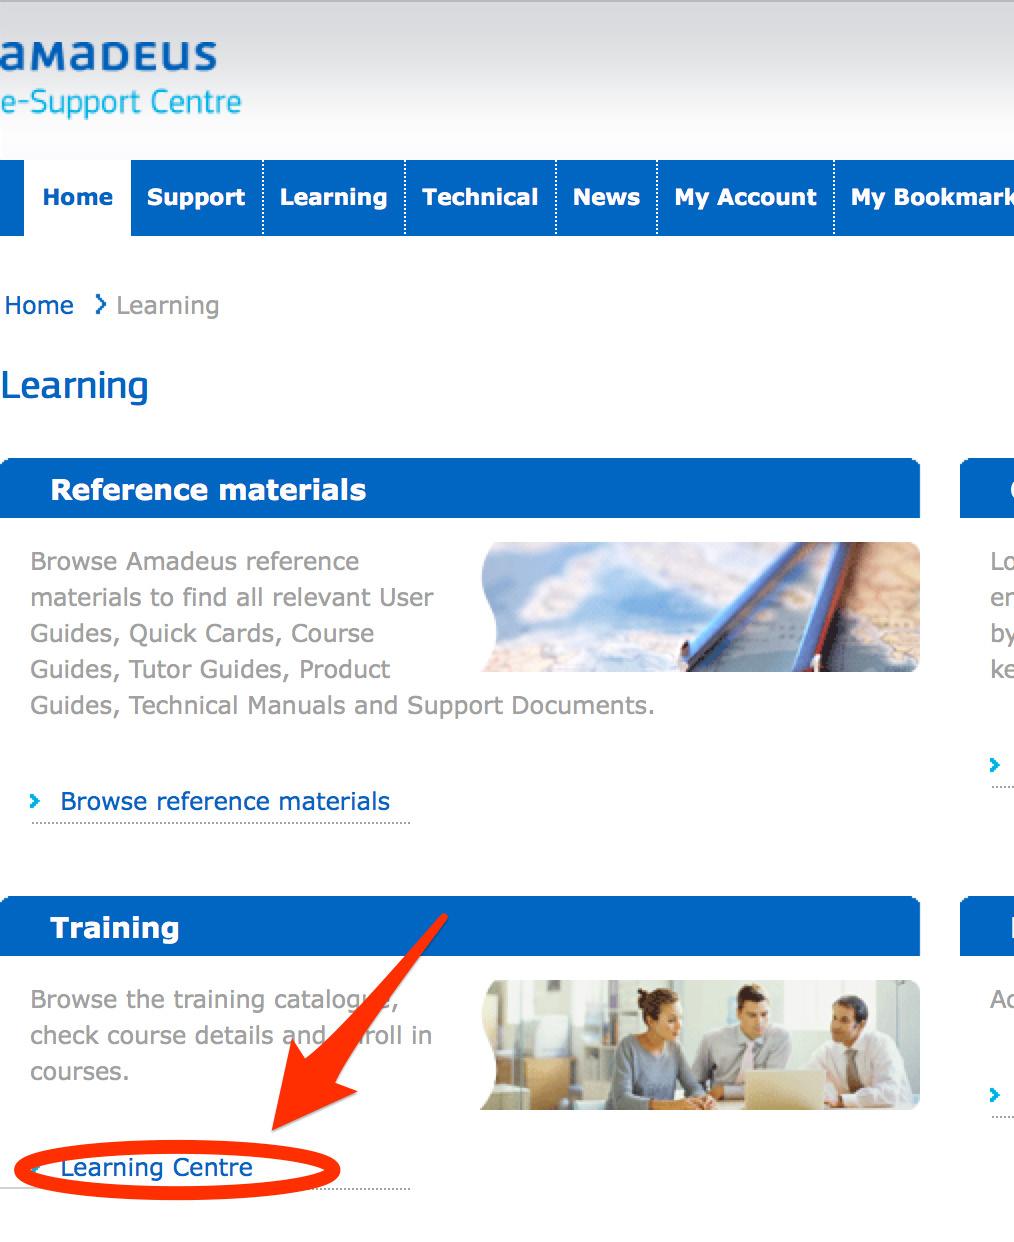 Training All training courses whether classroom or webinar as well as documents and other learning materials can be found online on Amadeus e-support Centre with additional materials on Amadeus